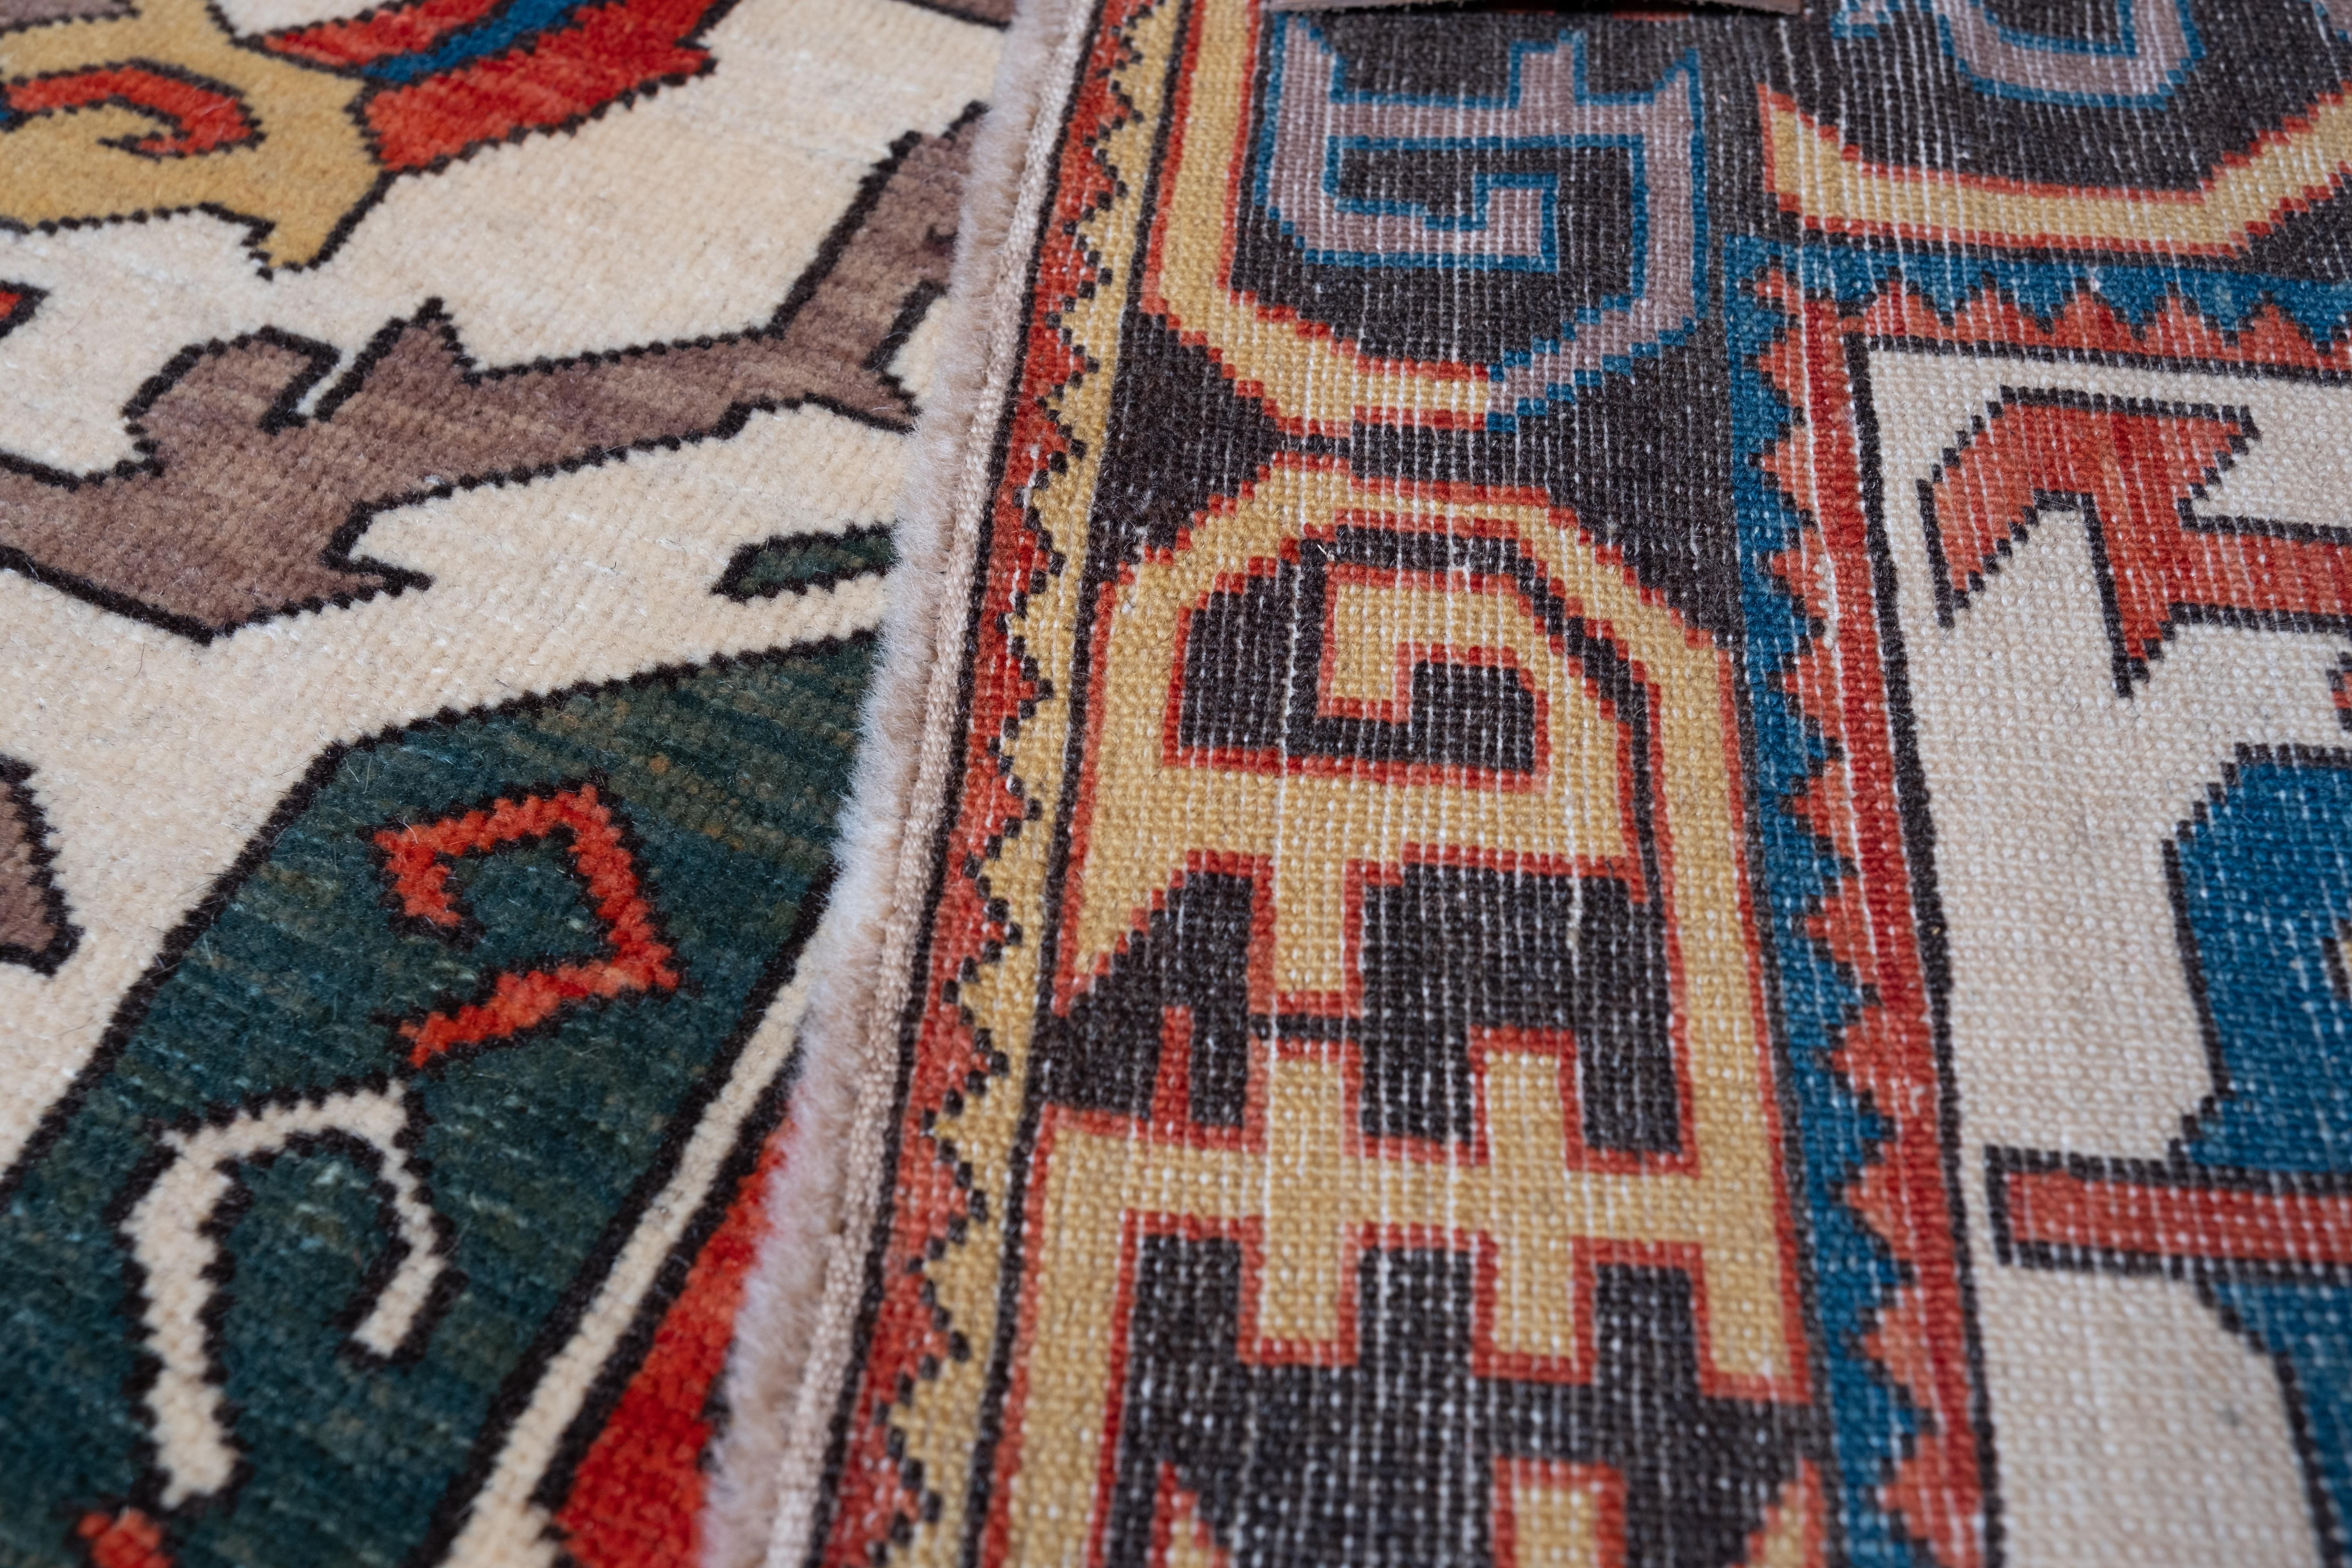 Vegetable Dyed Ararat Rugs Kuba Rug with Palmettes Caucasian 19th C. Revival Rug, Natural Dyed For Sale